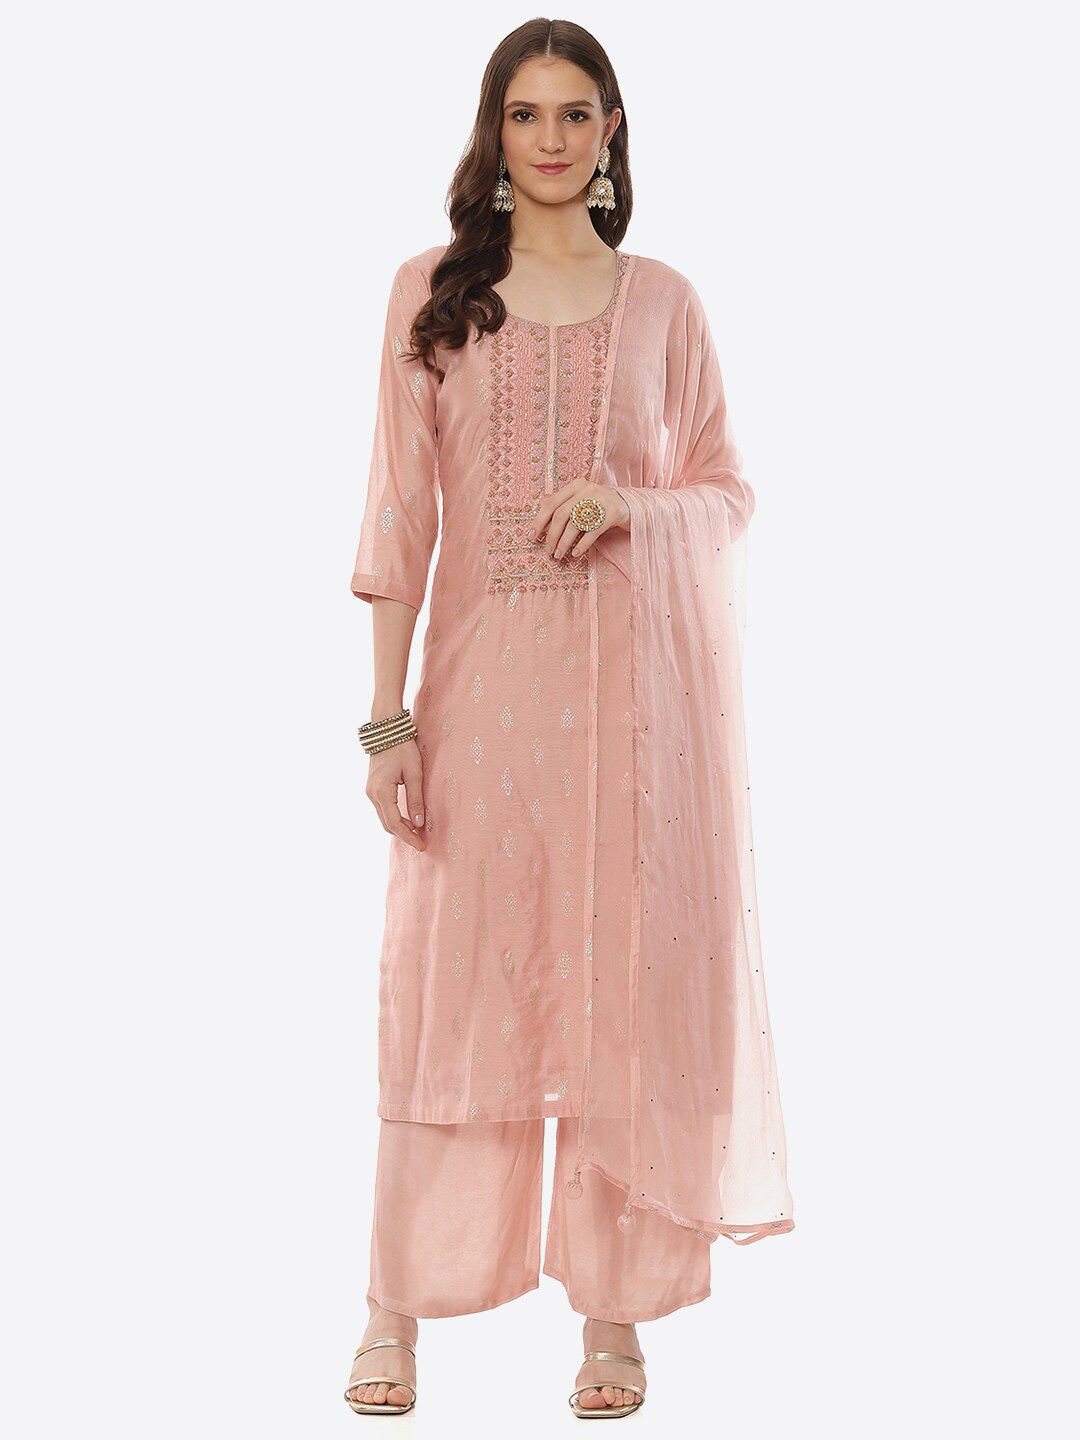 Biba Pink Embellished Unstitched Dress Material Price in India